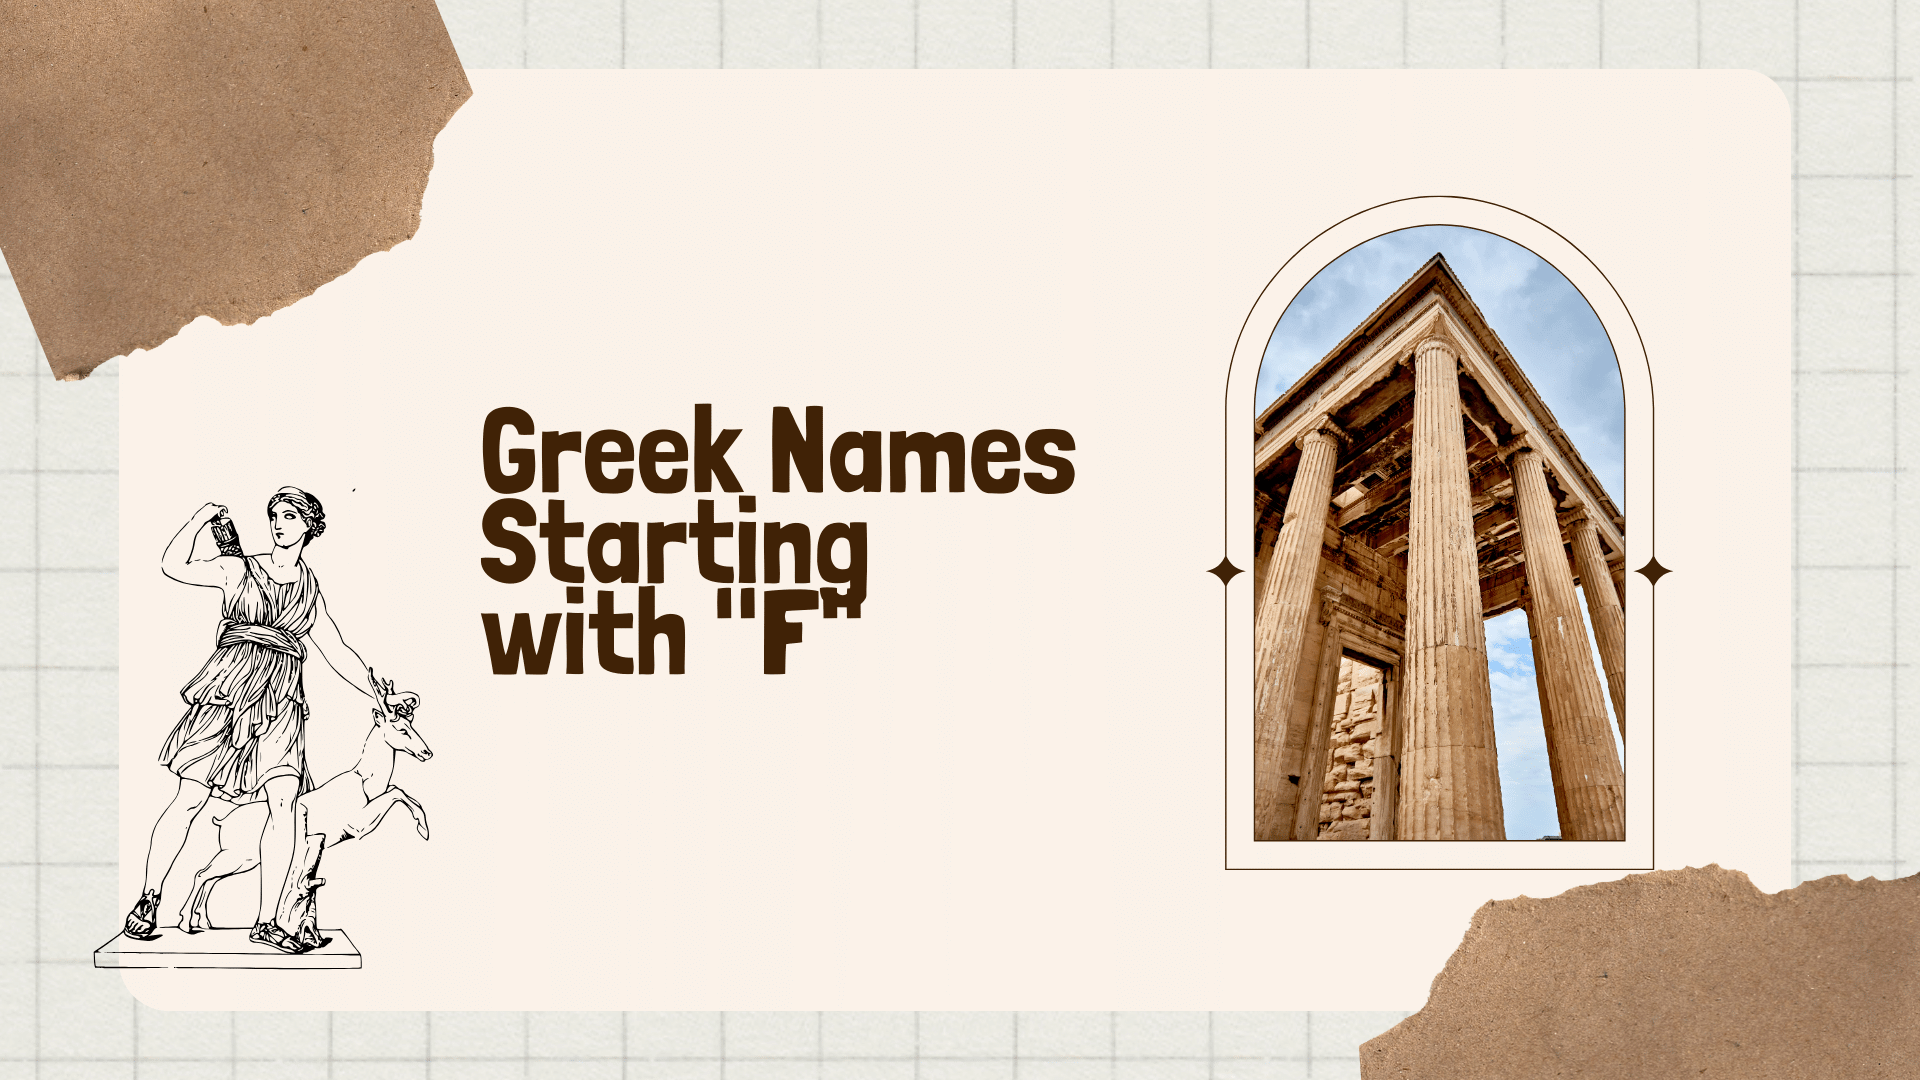 Greek Names Starting With "F"